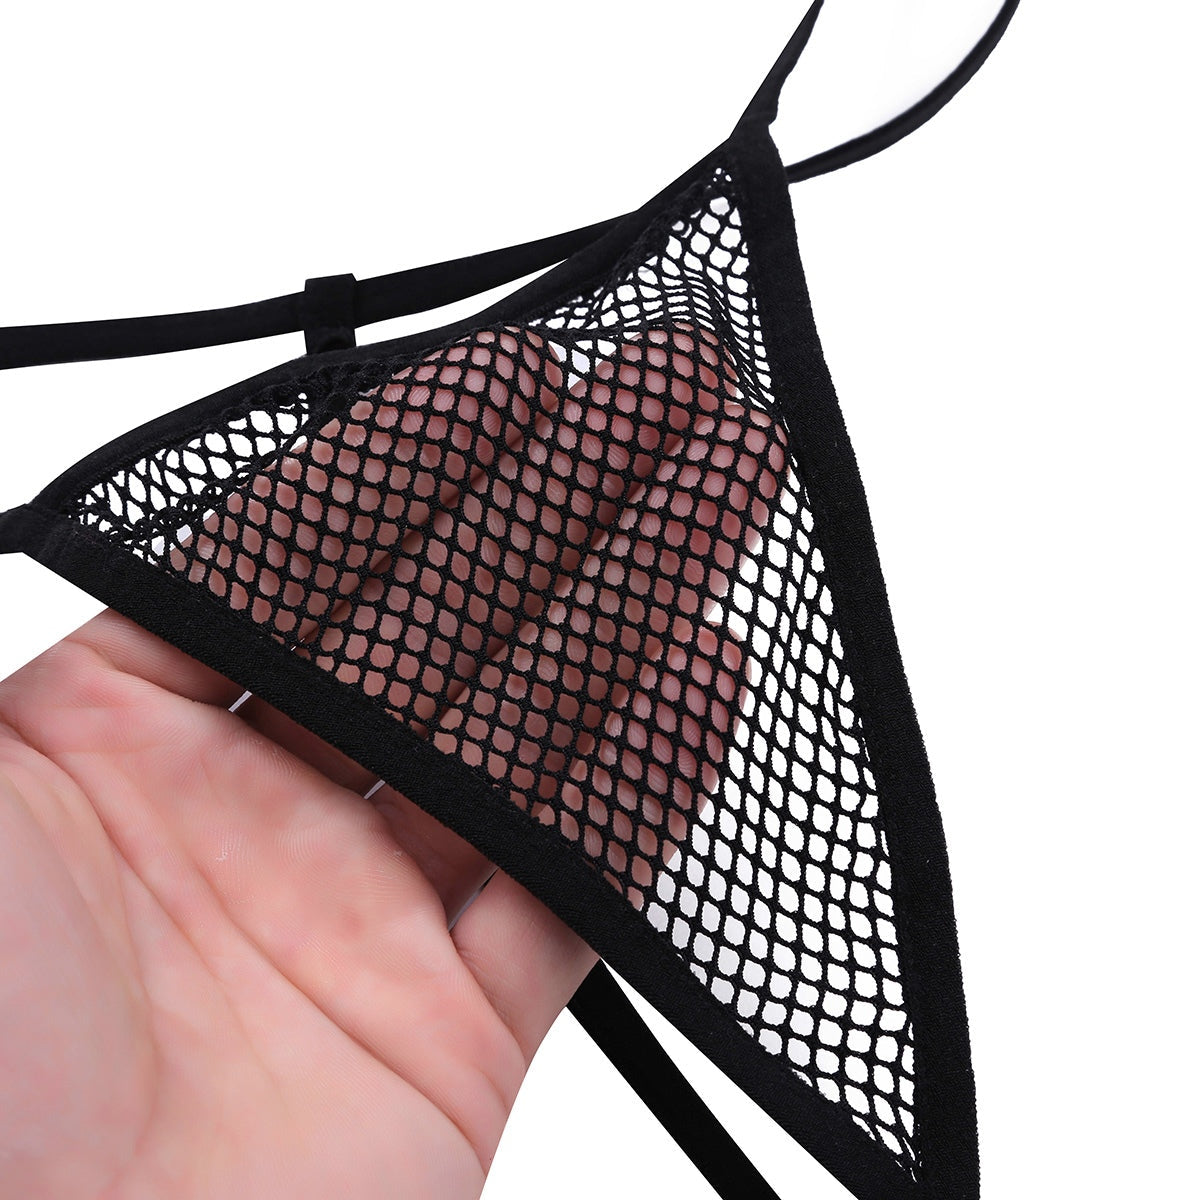 2 Piece Swimsuit Bra Top with Matching G-string Swimwear Lingerie Fishnet See-through Bikini Thongs Swimming Suit The Clothing Company Sydney